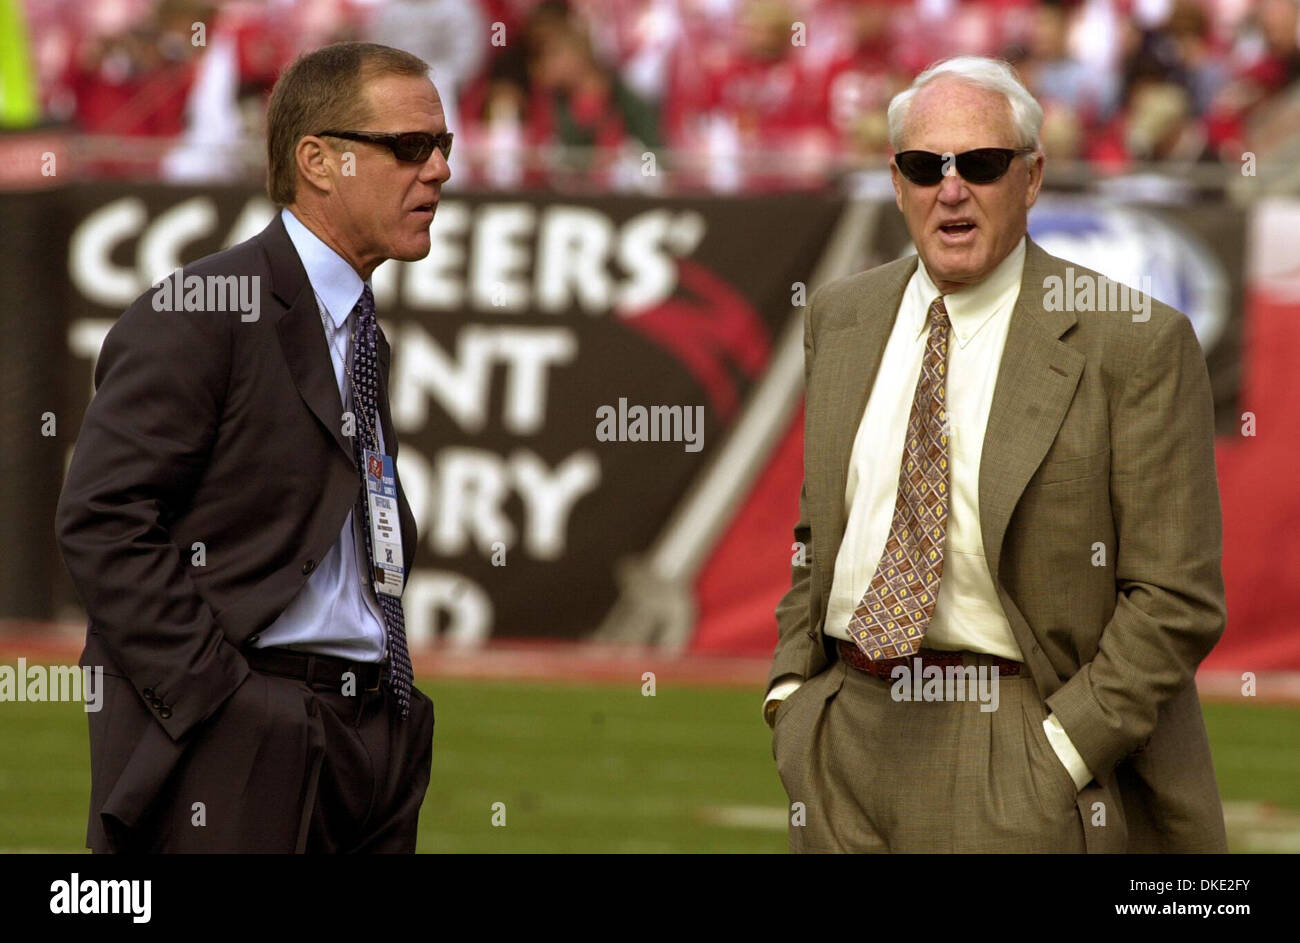 Jul 30, 2007 - San Francisco, CA, USA - WILLIAM ERNEST WALSH (November 30, 1931 Ð July 30, 2007), one of the greatest football coaches of all time. Bill Walsh, the inventor of the West Coast Offense. Walsh, guided the San Francisco 49ers to three Super Bowl championships and six NFC West division titles in his 10 years as head coach, has died at the age of 75, following a long batt Stock Photo